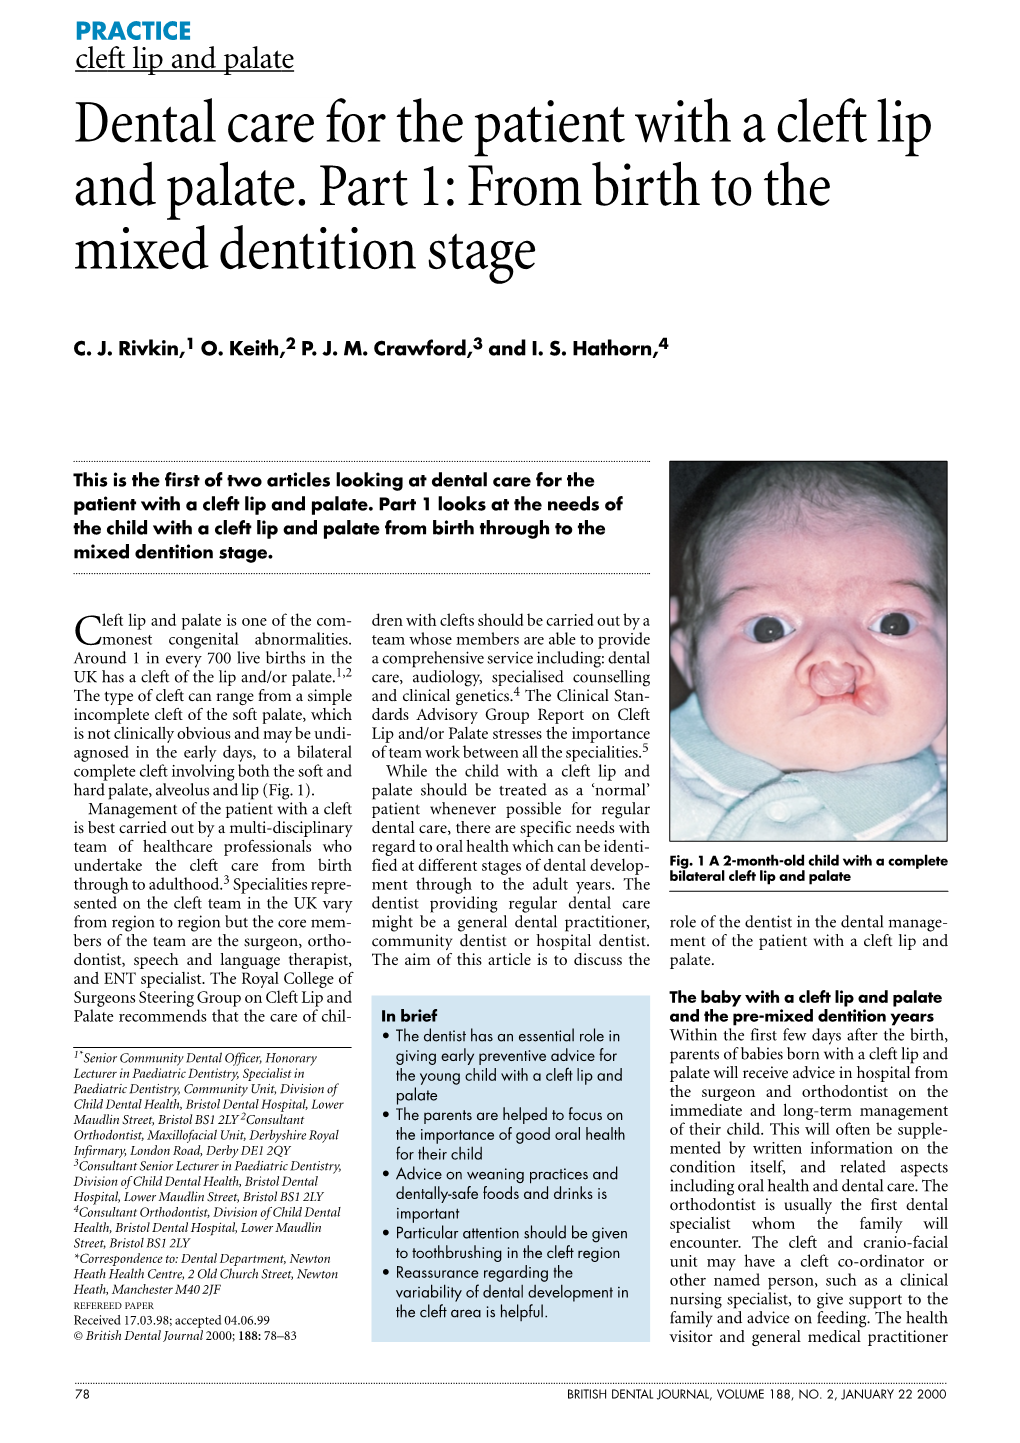 Dental Care for the Patient with a Cleft Lip and Palate. Part 1: from Birth to the Mixed Dentition Stage